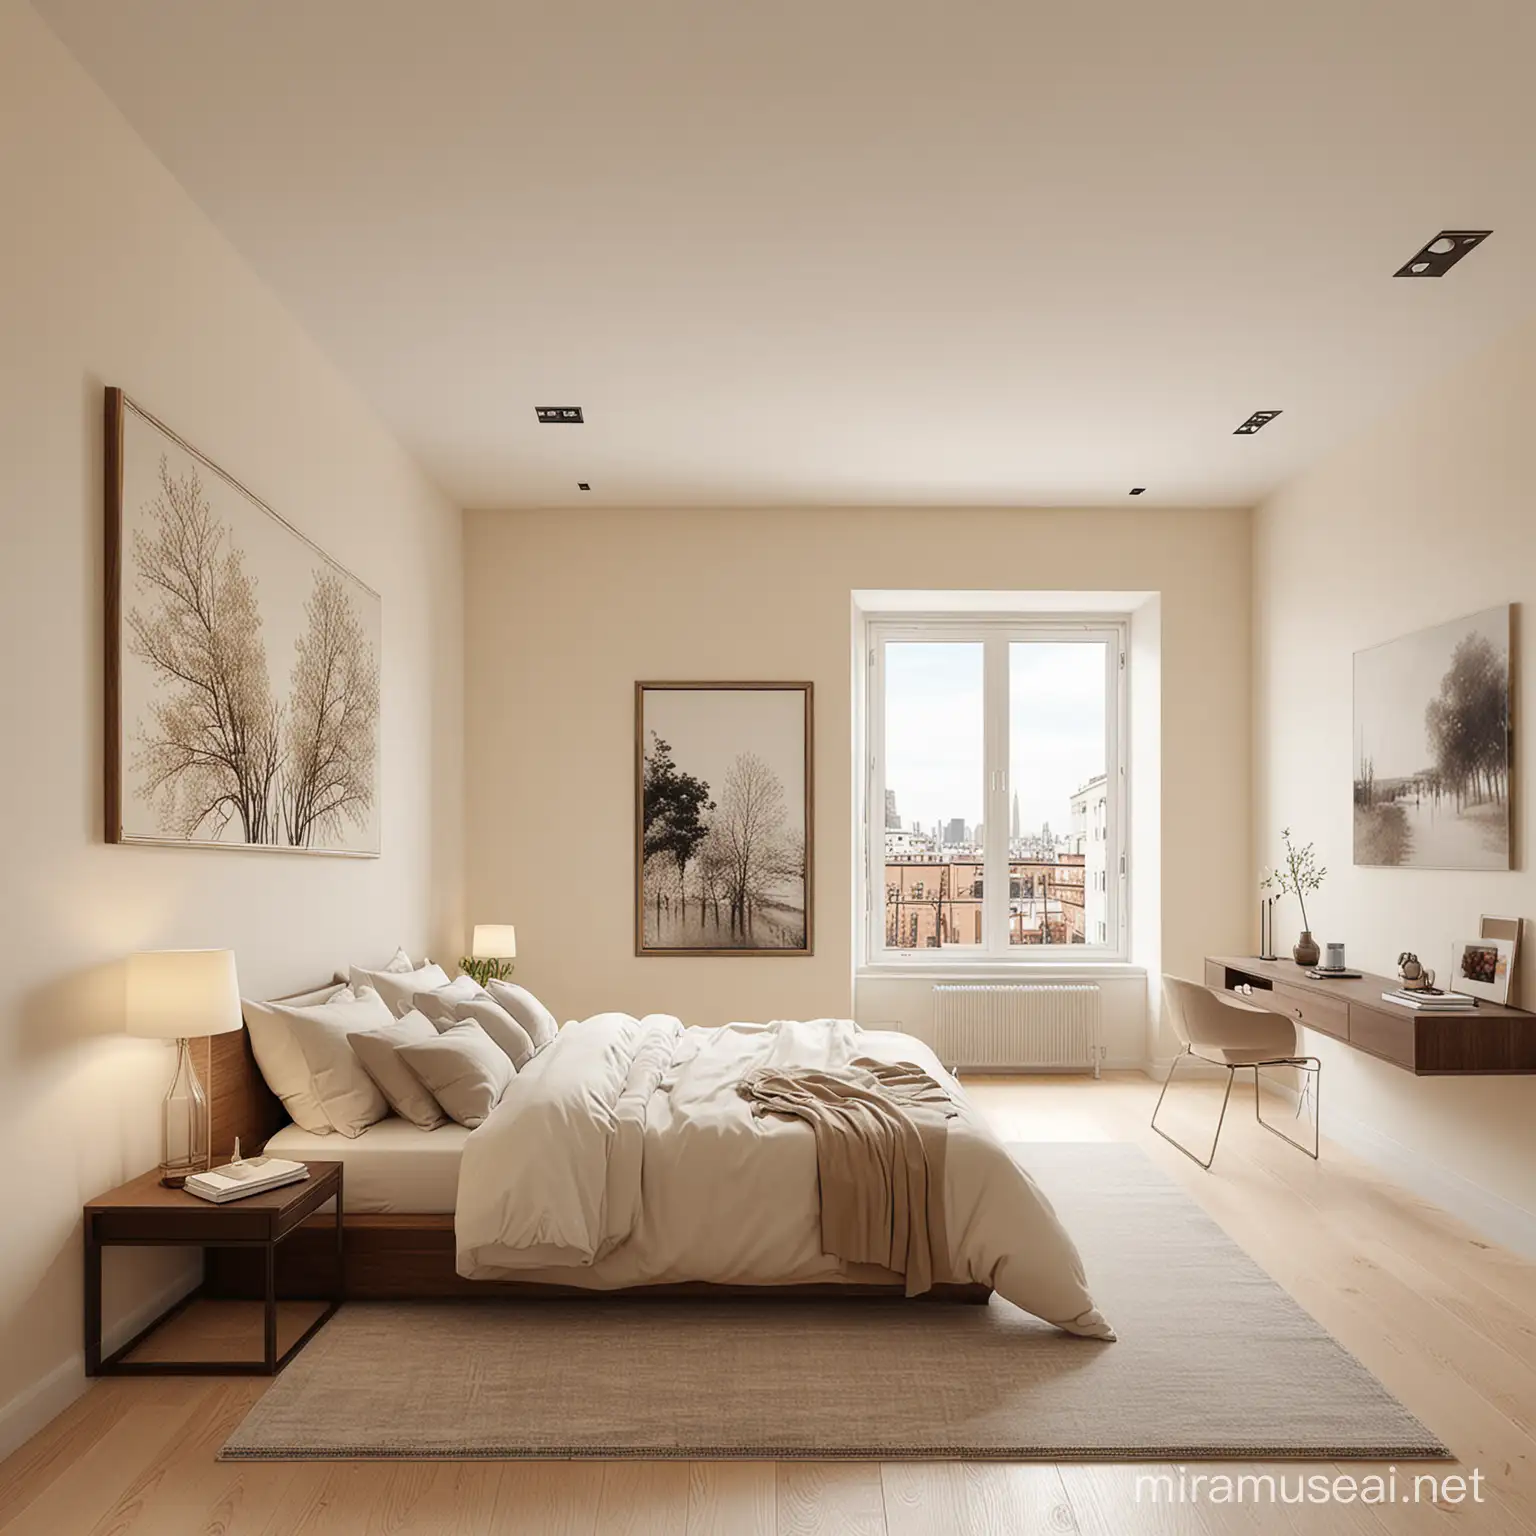 rendering of a minimalist bedroom, cream 
walls and beautiful artwork, second floor of an apartment 
